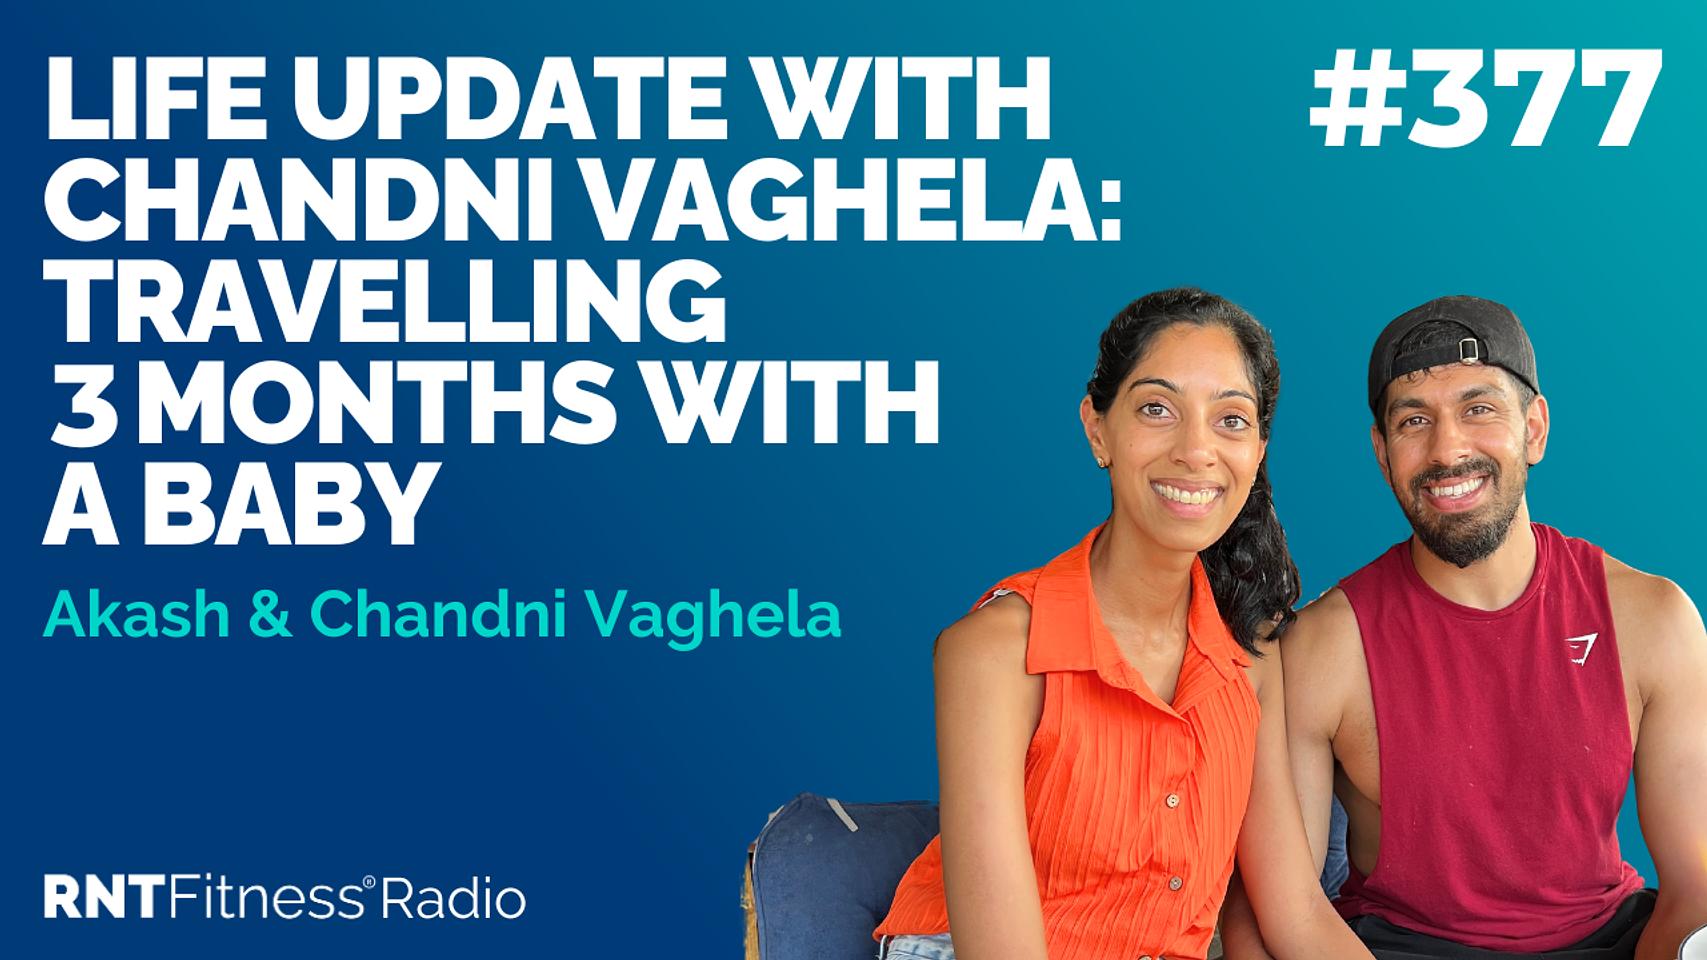 Ep 377 - Life Update with Chandni Vaghela:  Travelling 3 Months With A Baby